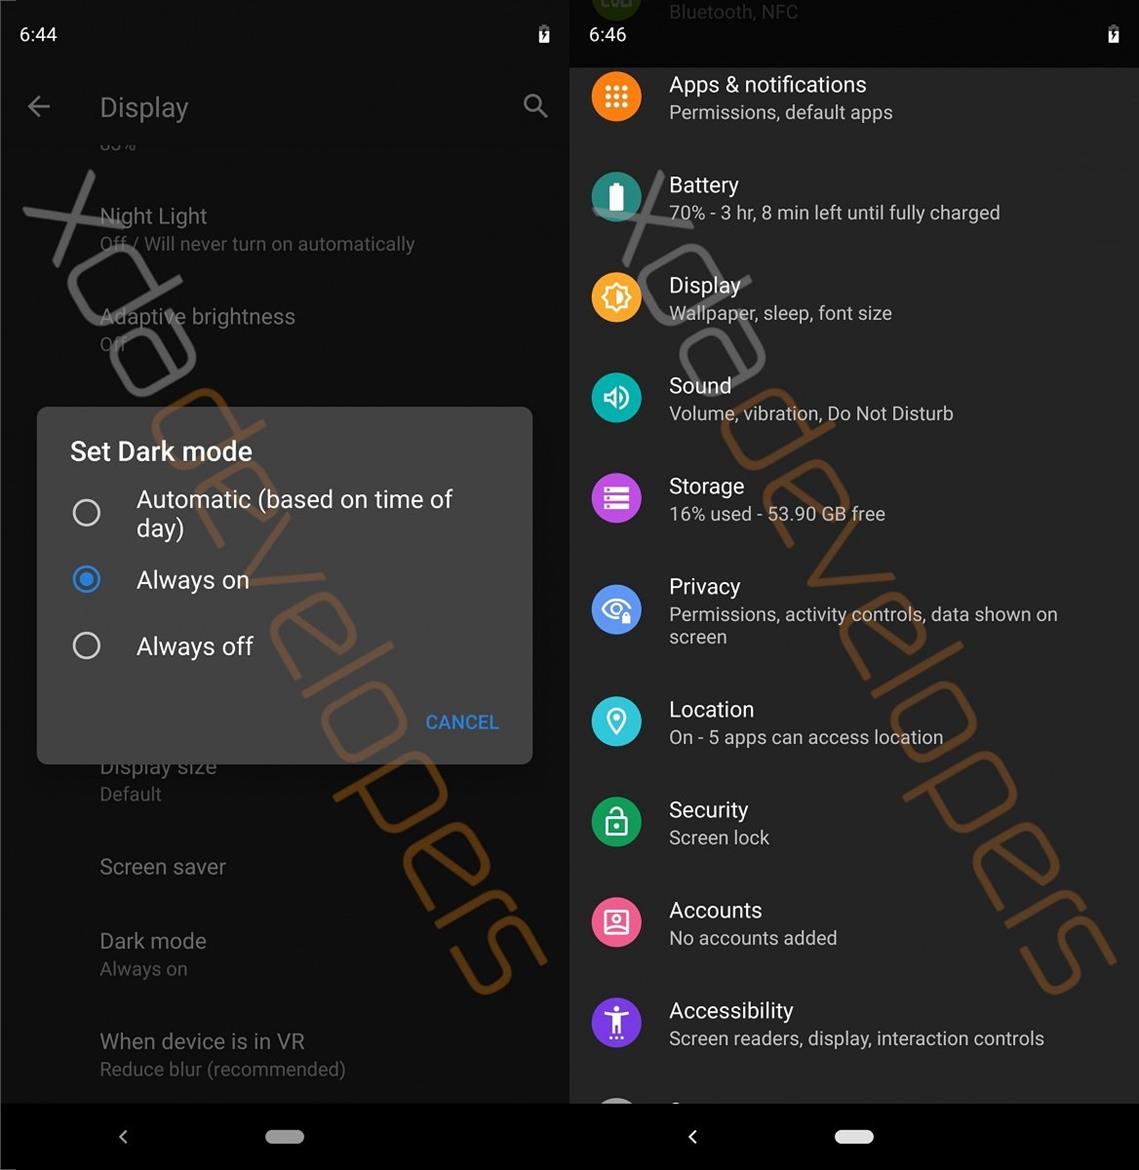 Google Android Q Leaks With System-Wide Dark Mode And Revamped Location Permissions